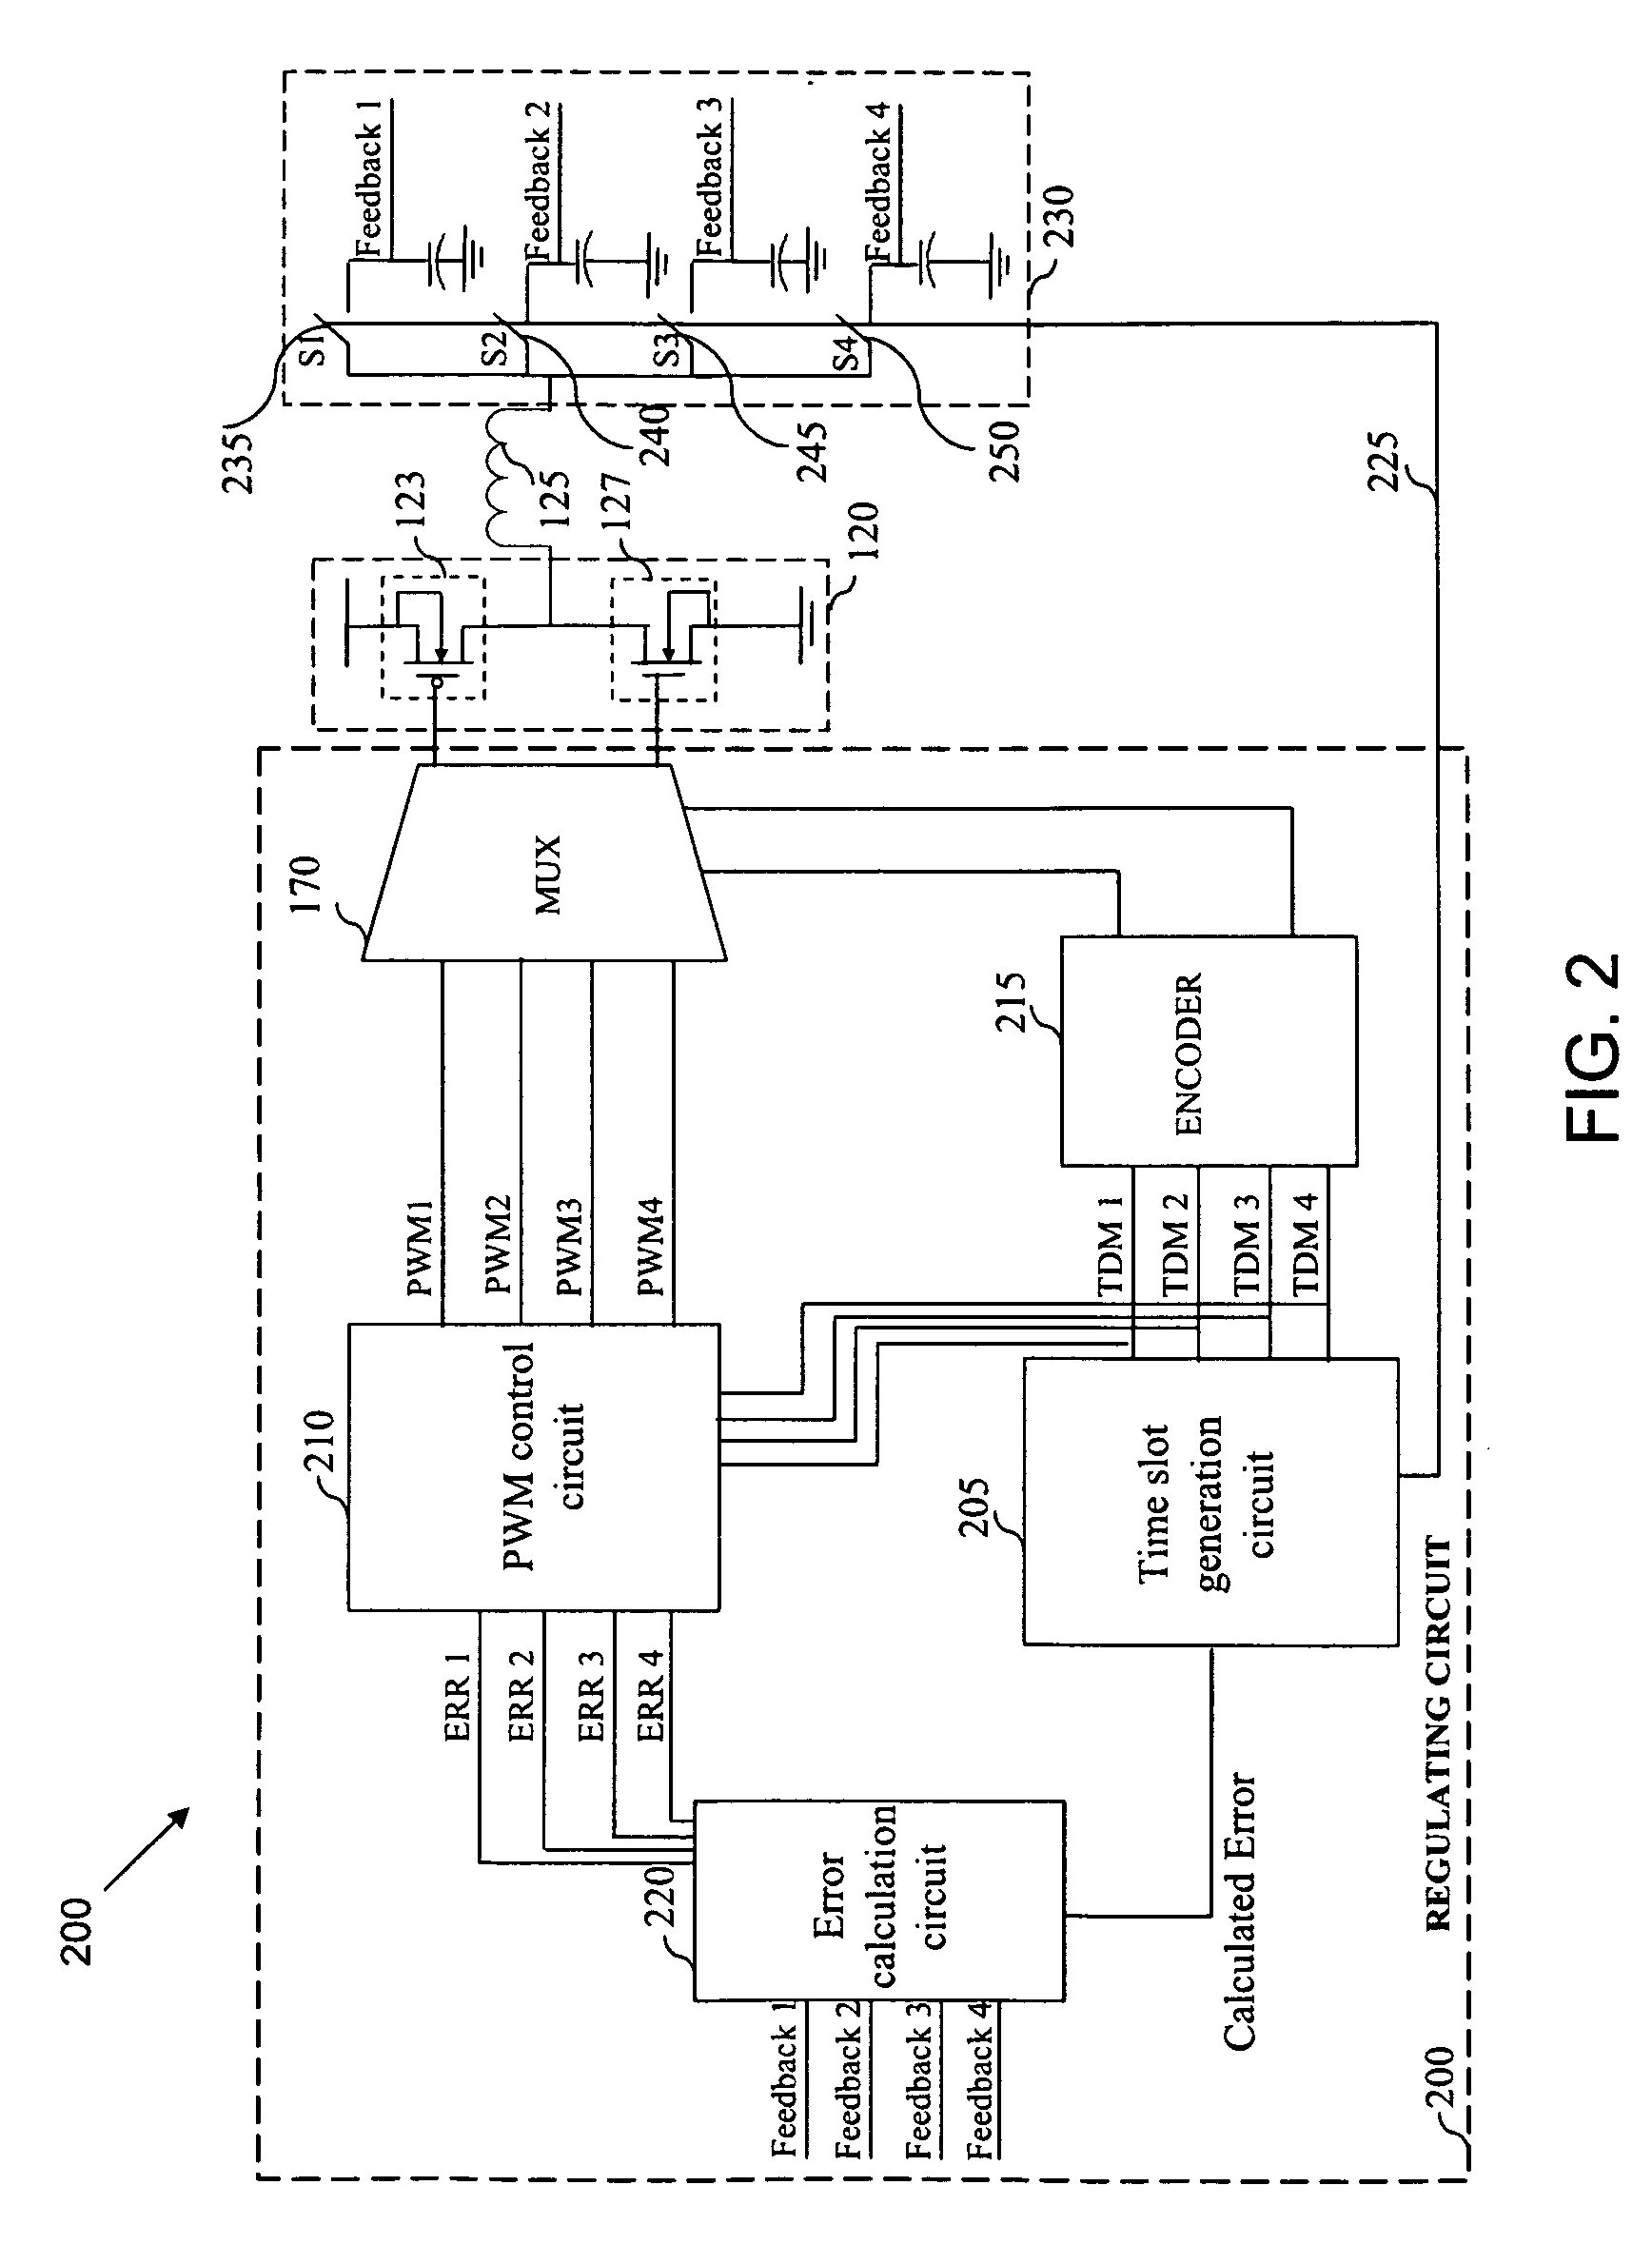 Single inductor multiple output switching devices